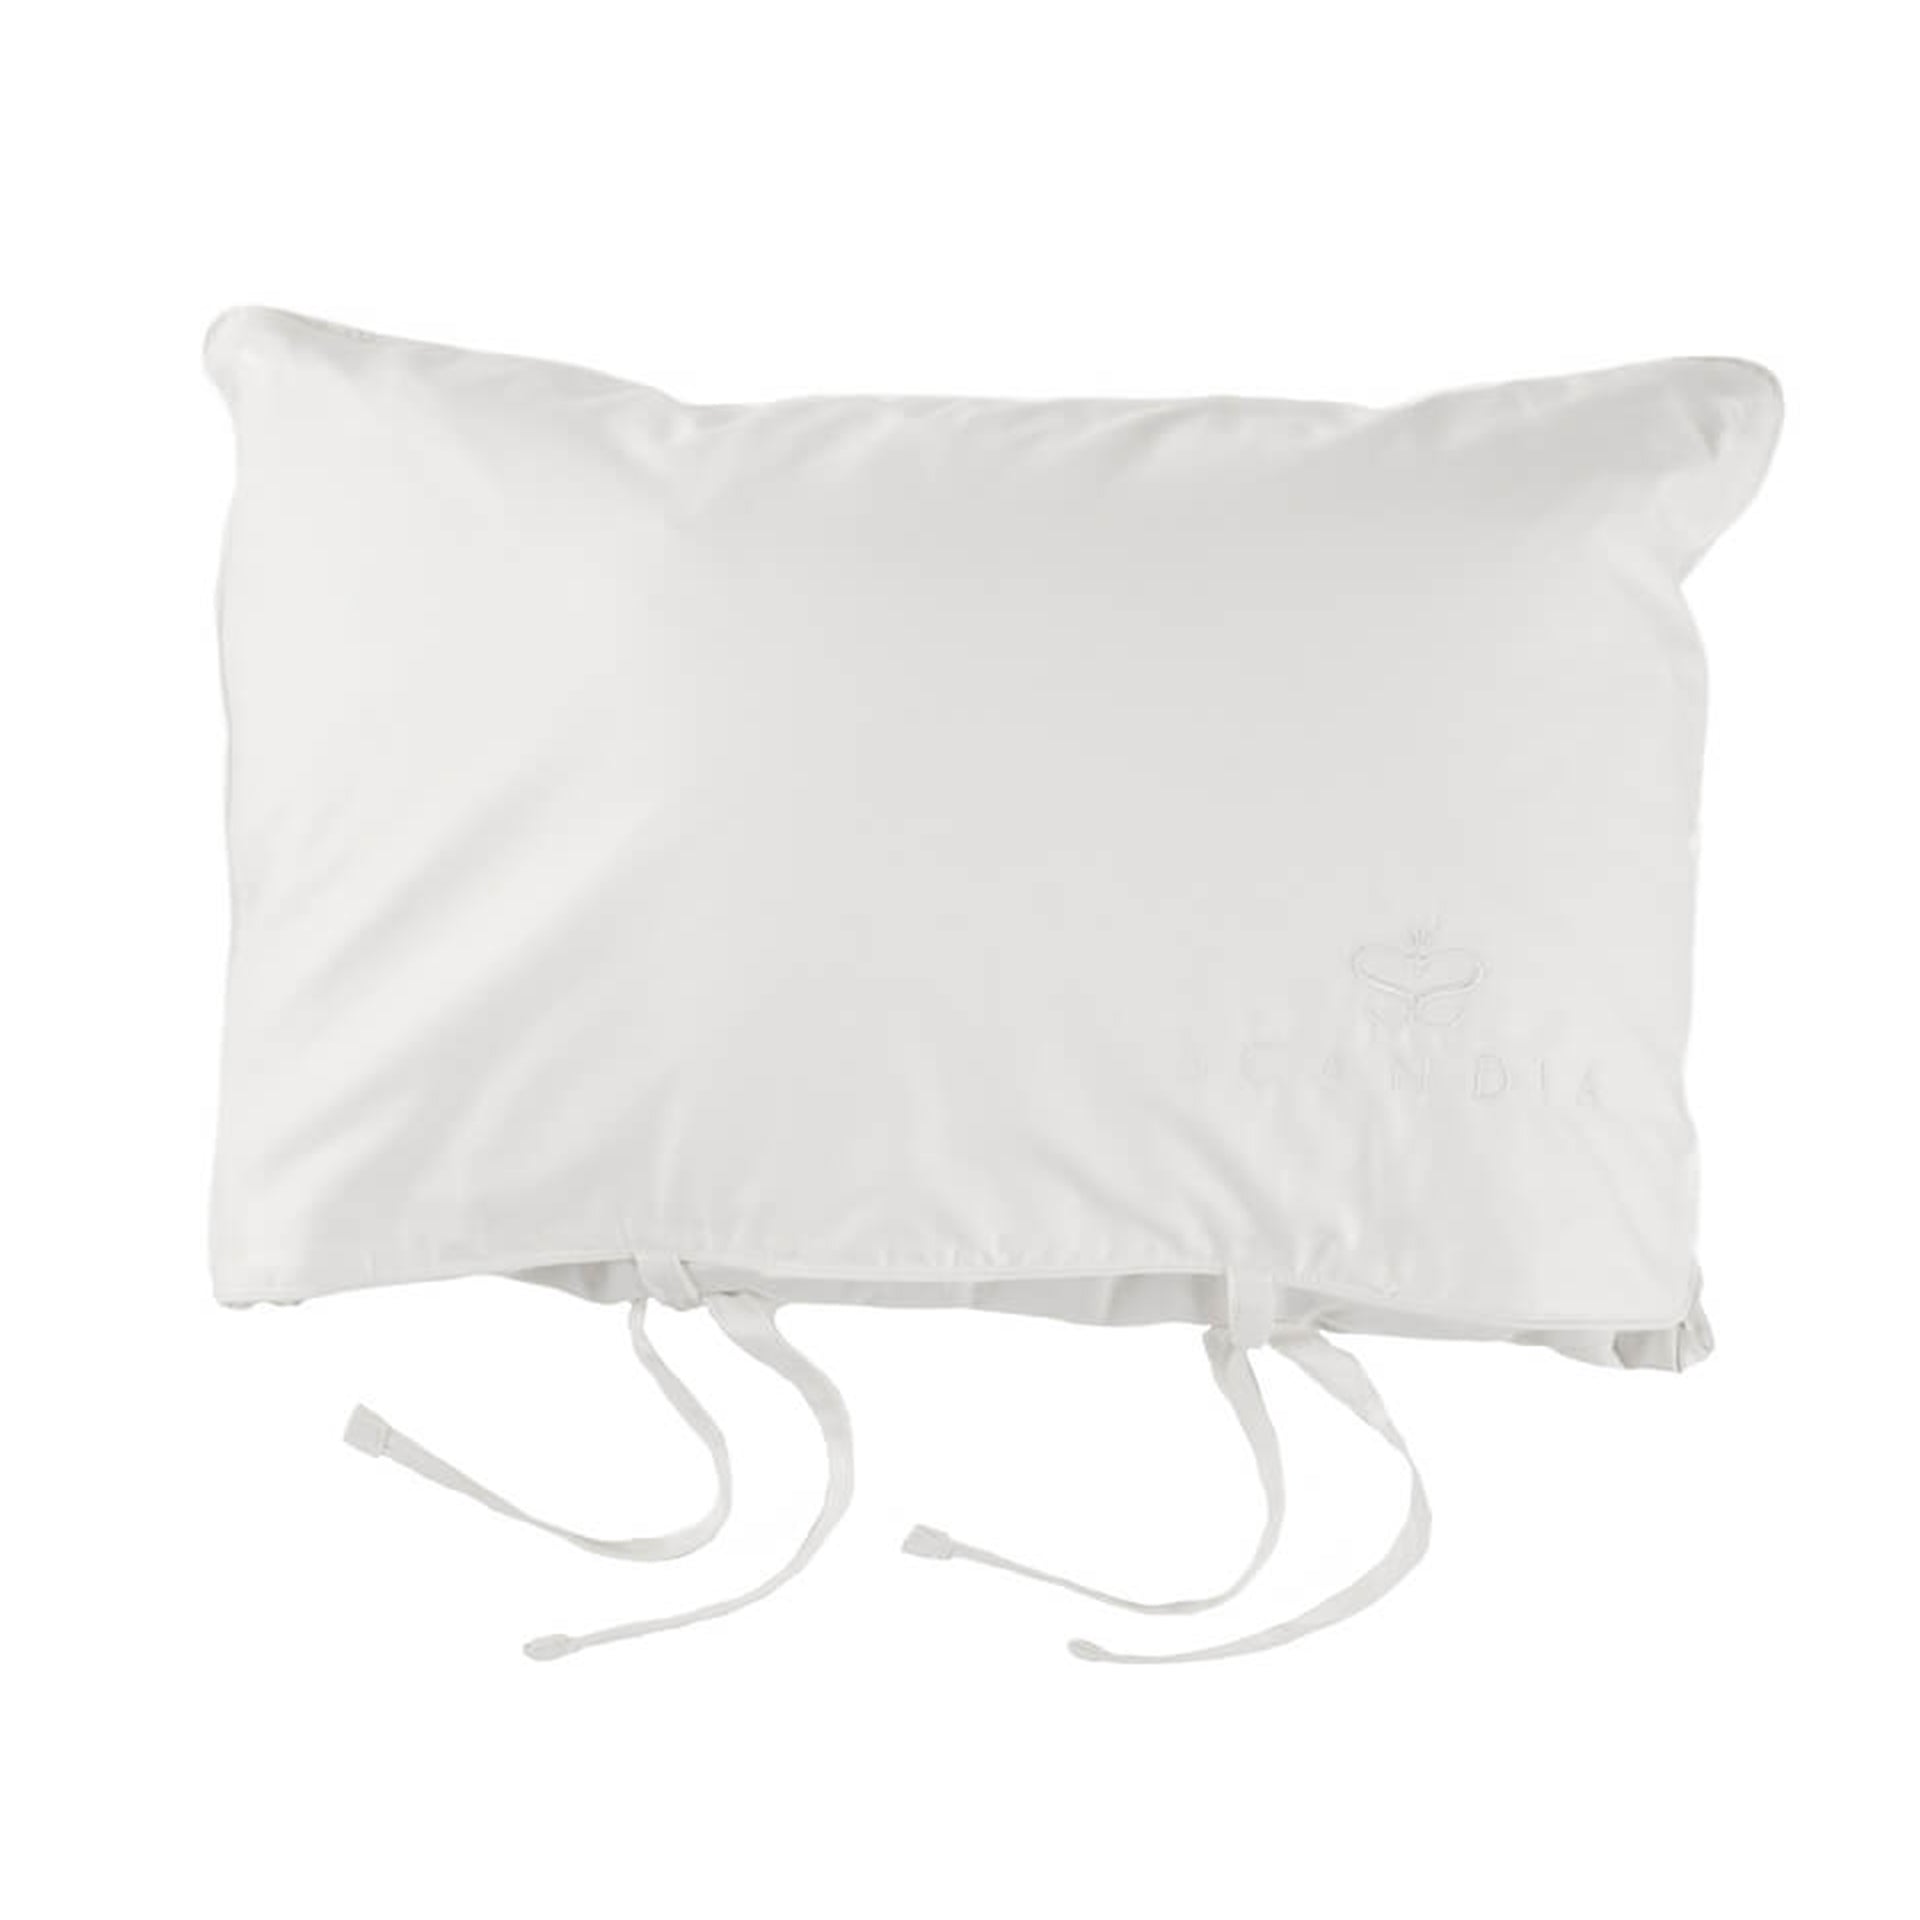 scandia home down travel attache covered in a sateen cotton in color white, the perfect travel companion, 